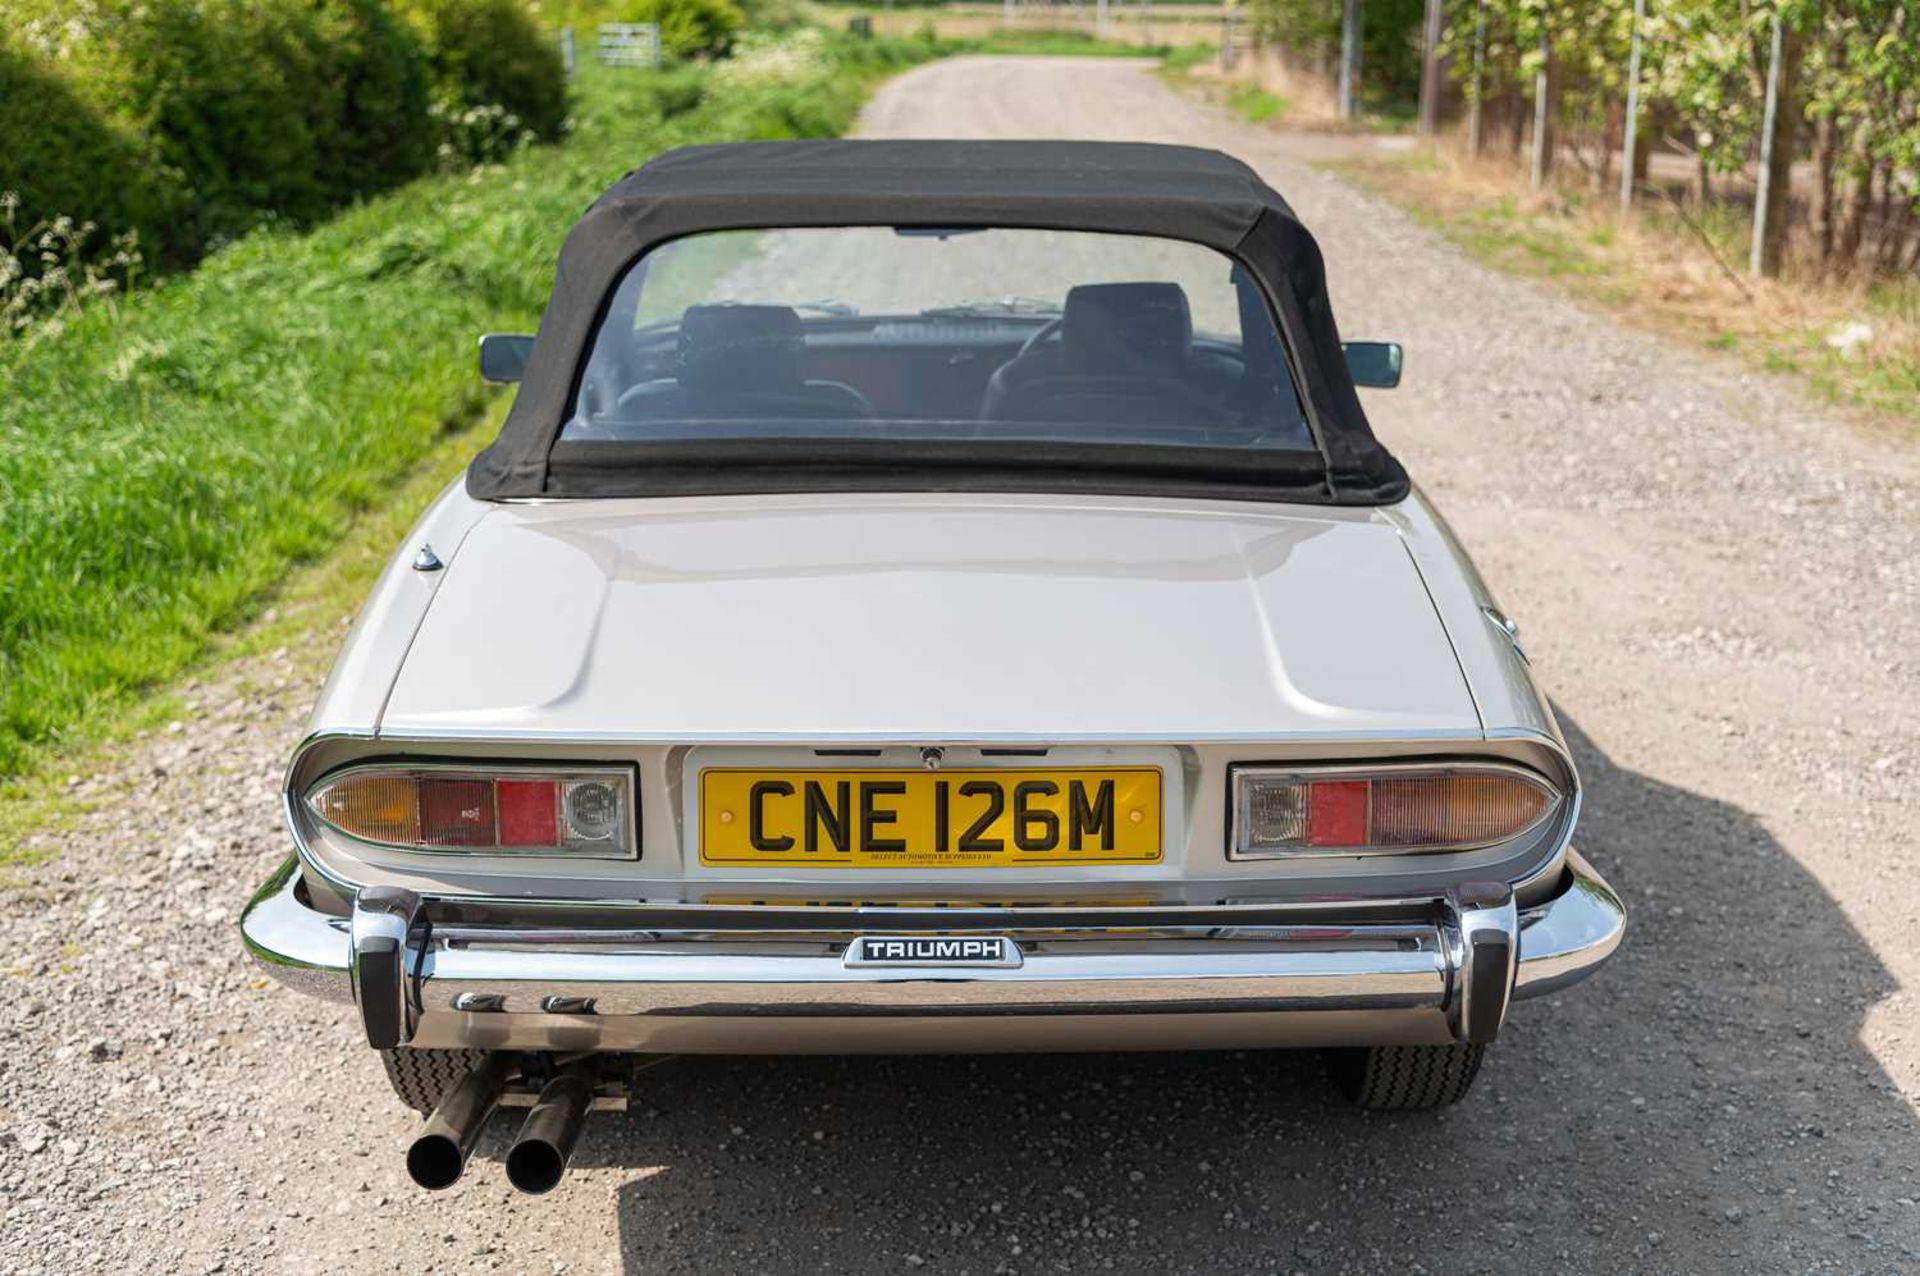 1974 Triumph Stag ***NO RESERVE*** Fully-restored example, equipped with manual overdrive transmissi - Image 19 of 83